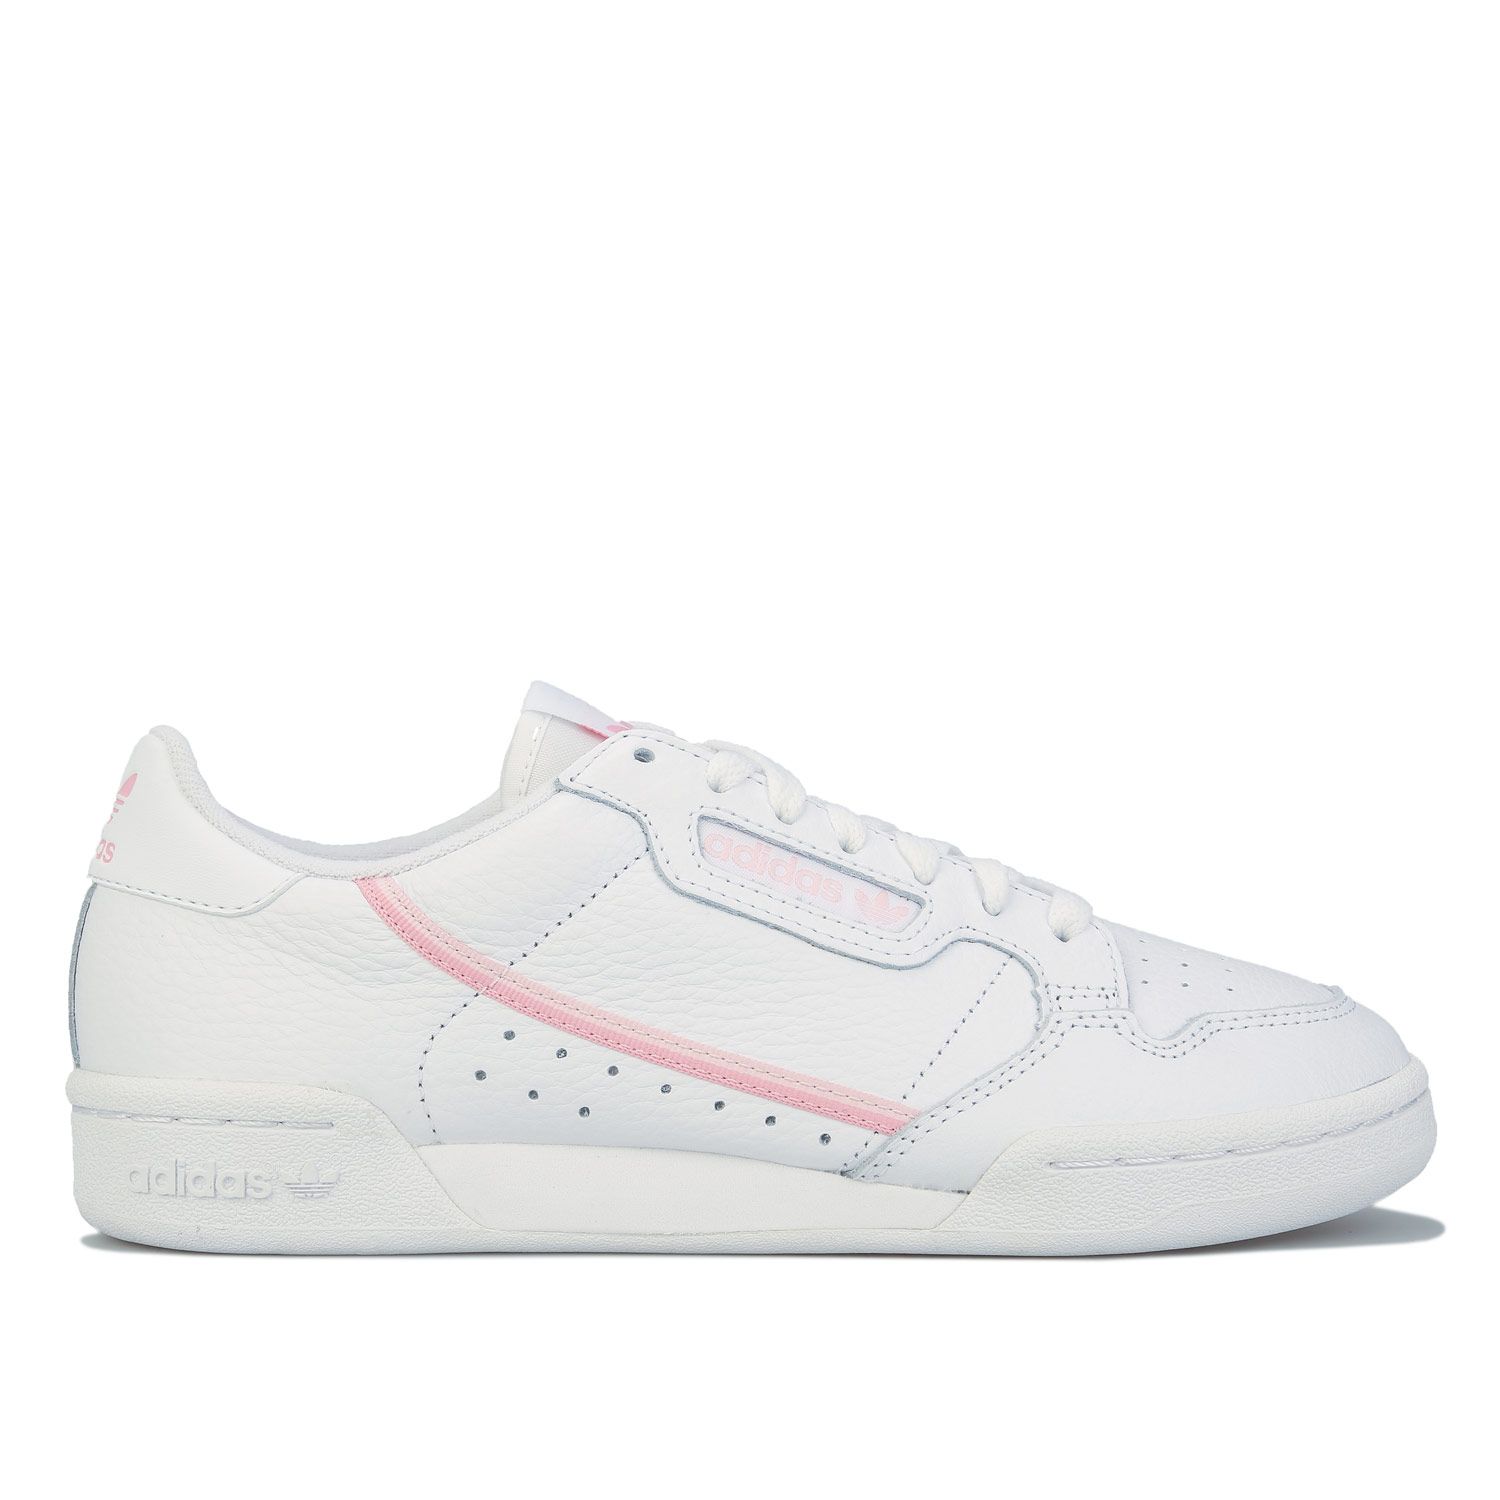 adidas originals white and pink continental 80 trainers